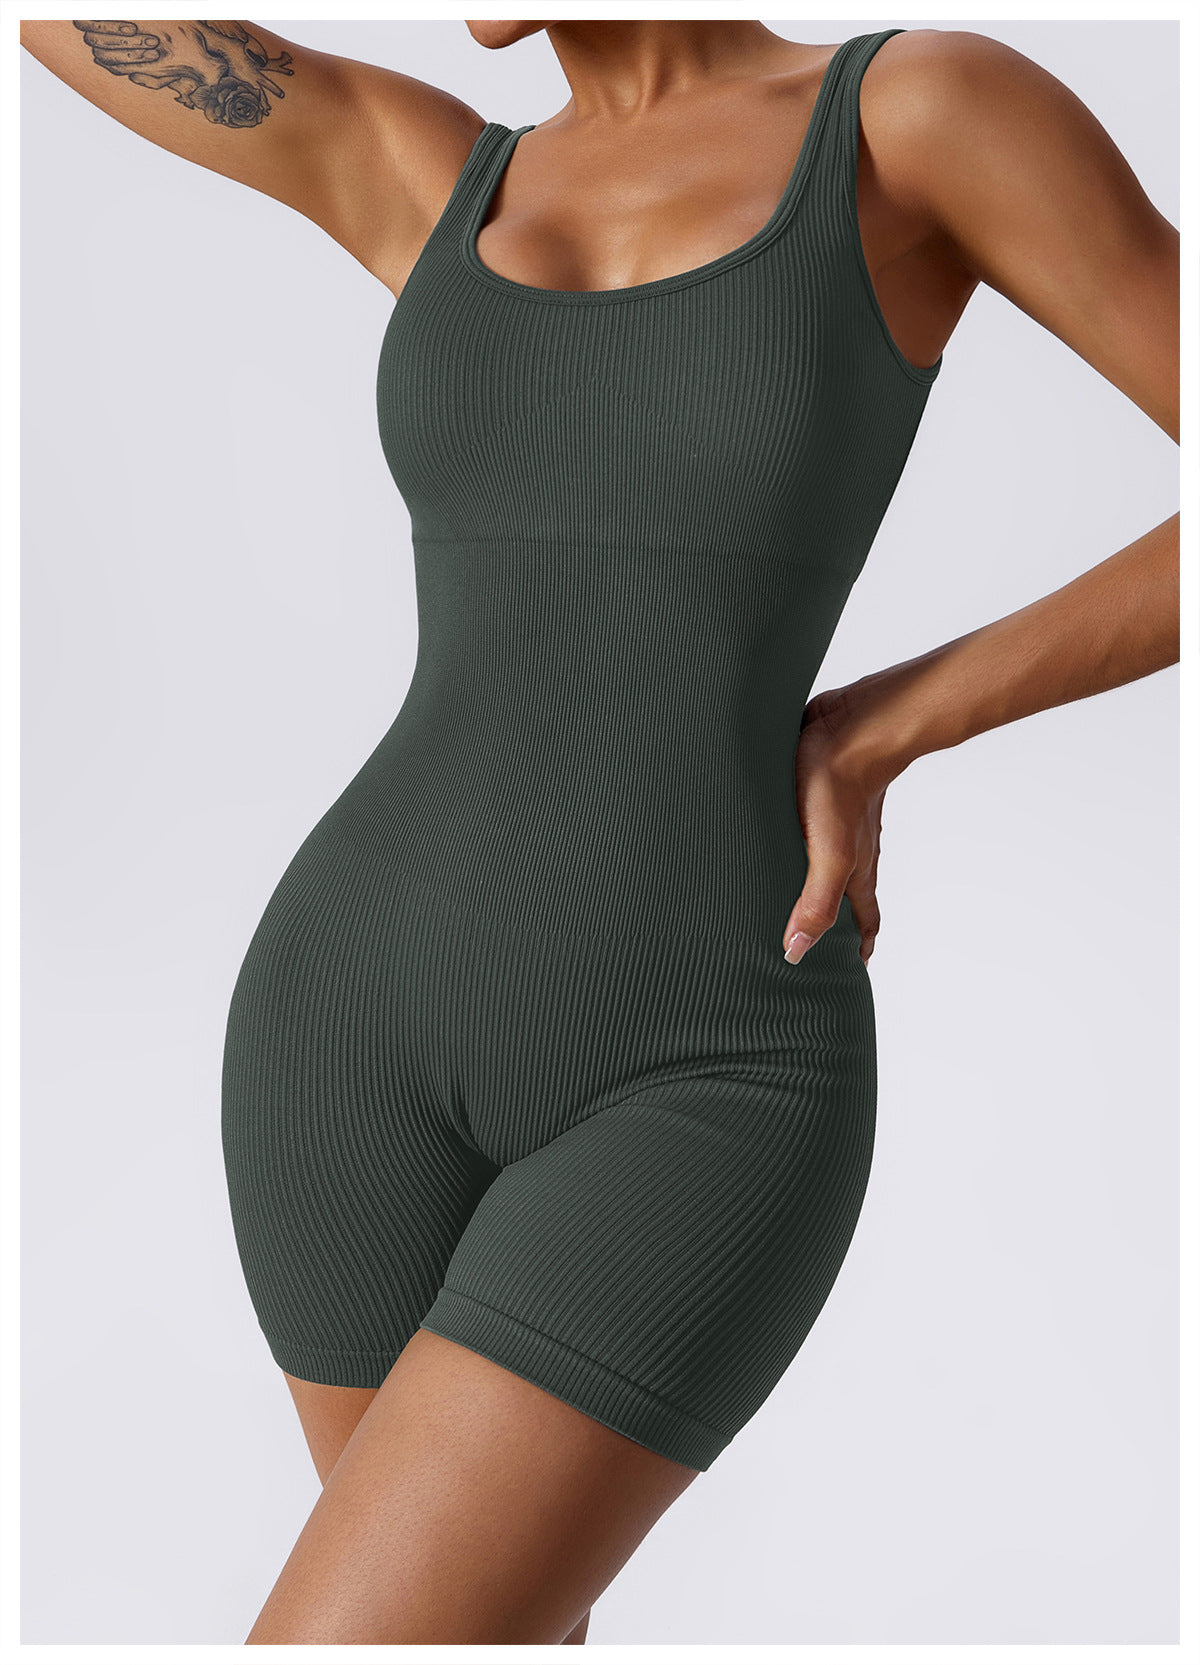 Seamless one-piece yoga suit women's high-elastic one-piece tight-fitting one-piece suit in the air beautiful back yoga suit 6982